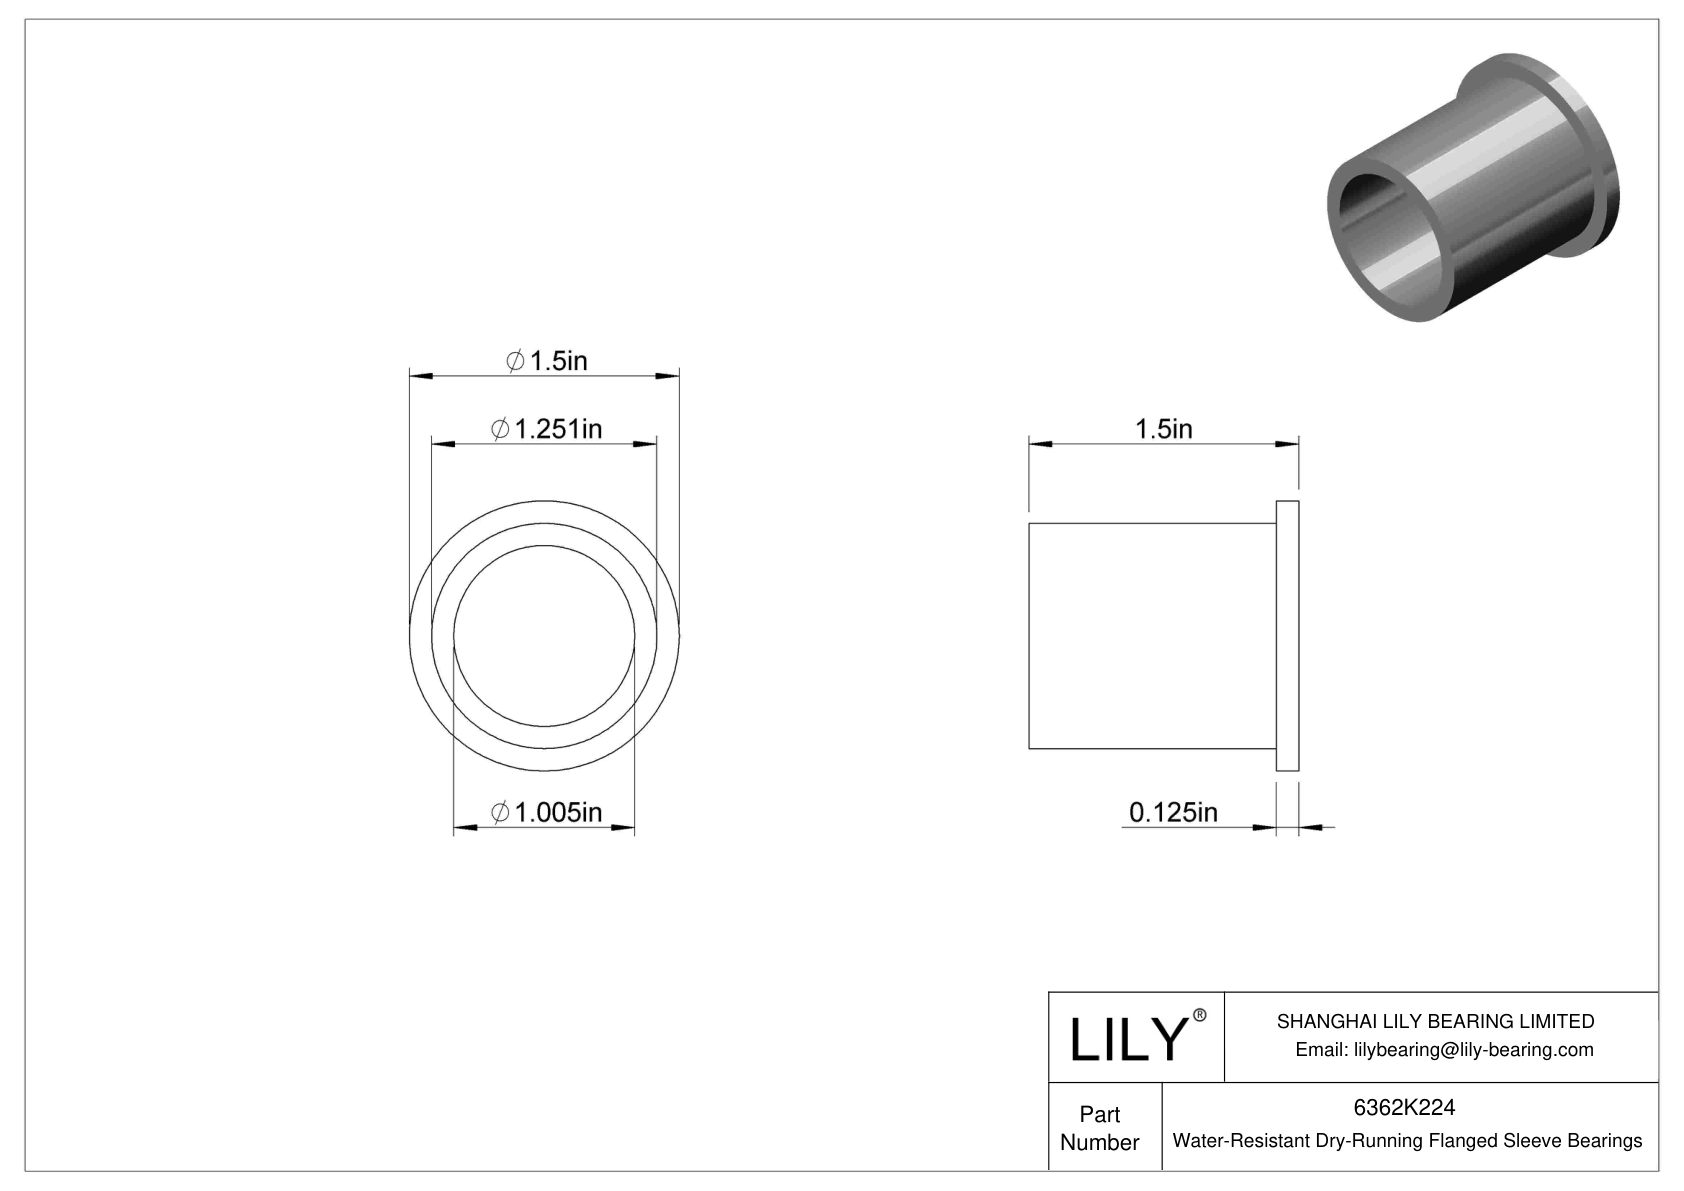 GDGCKCCE Water-Resistant Dry-Running Flanged Sleeve Bearings cad drawing